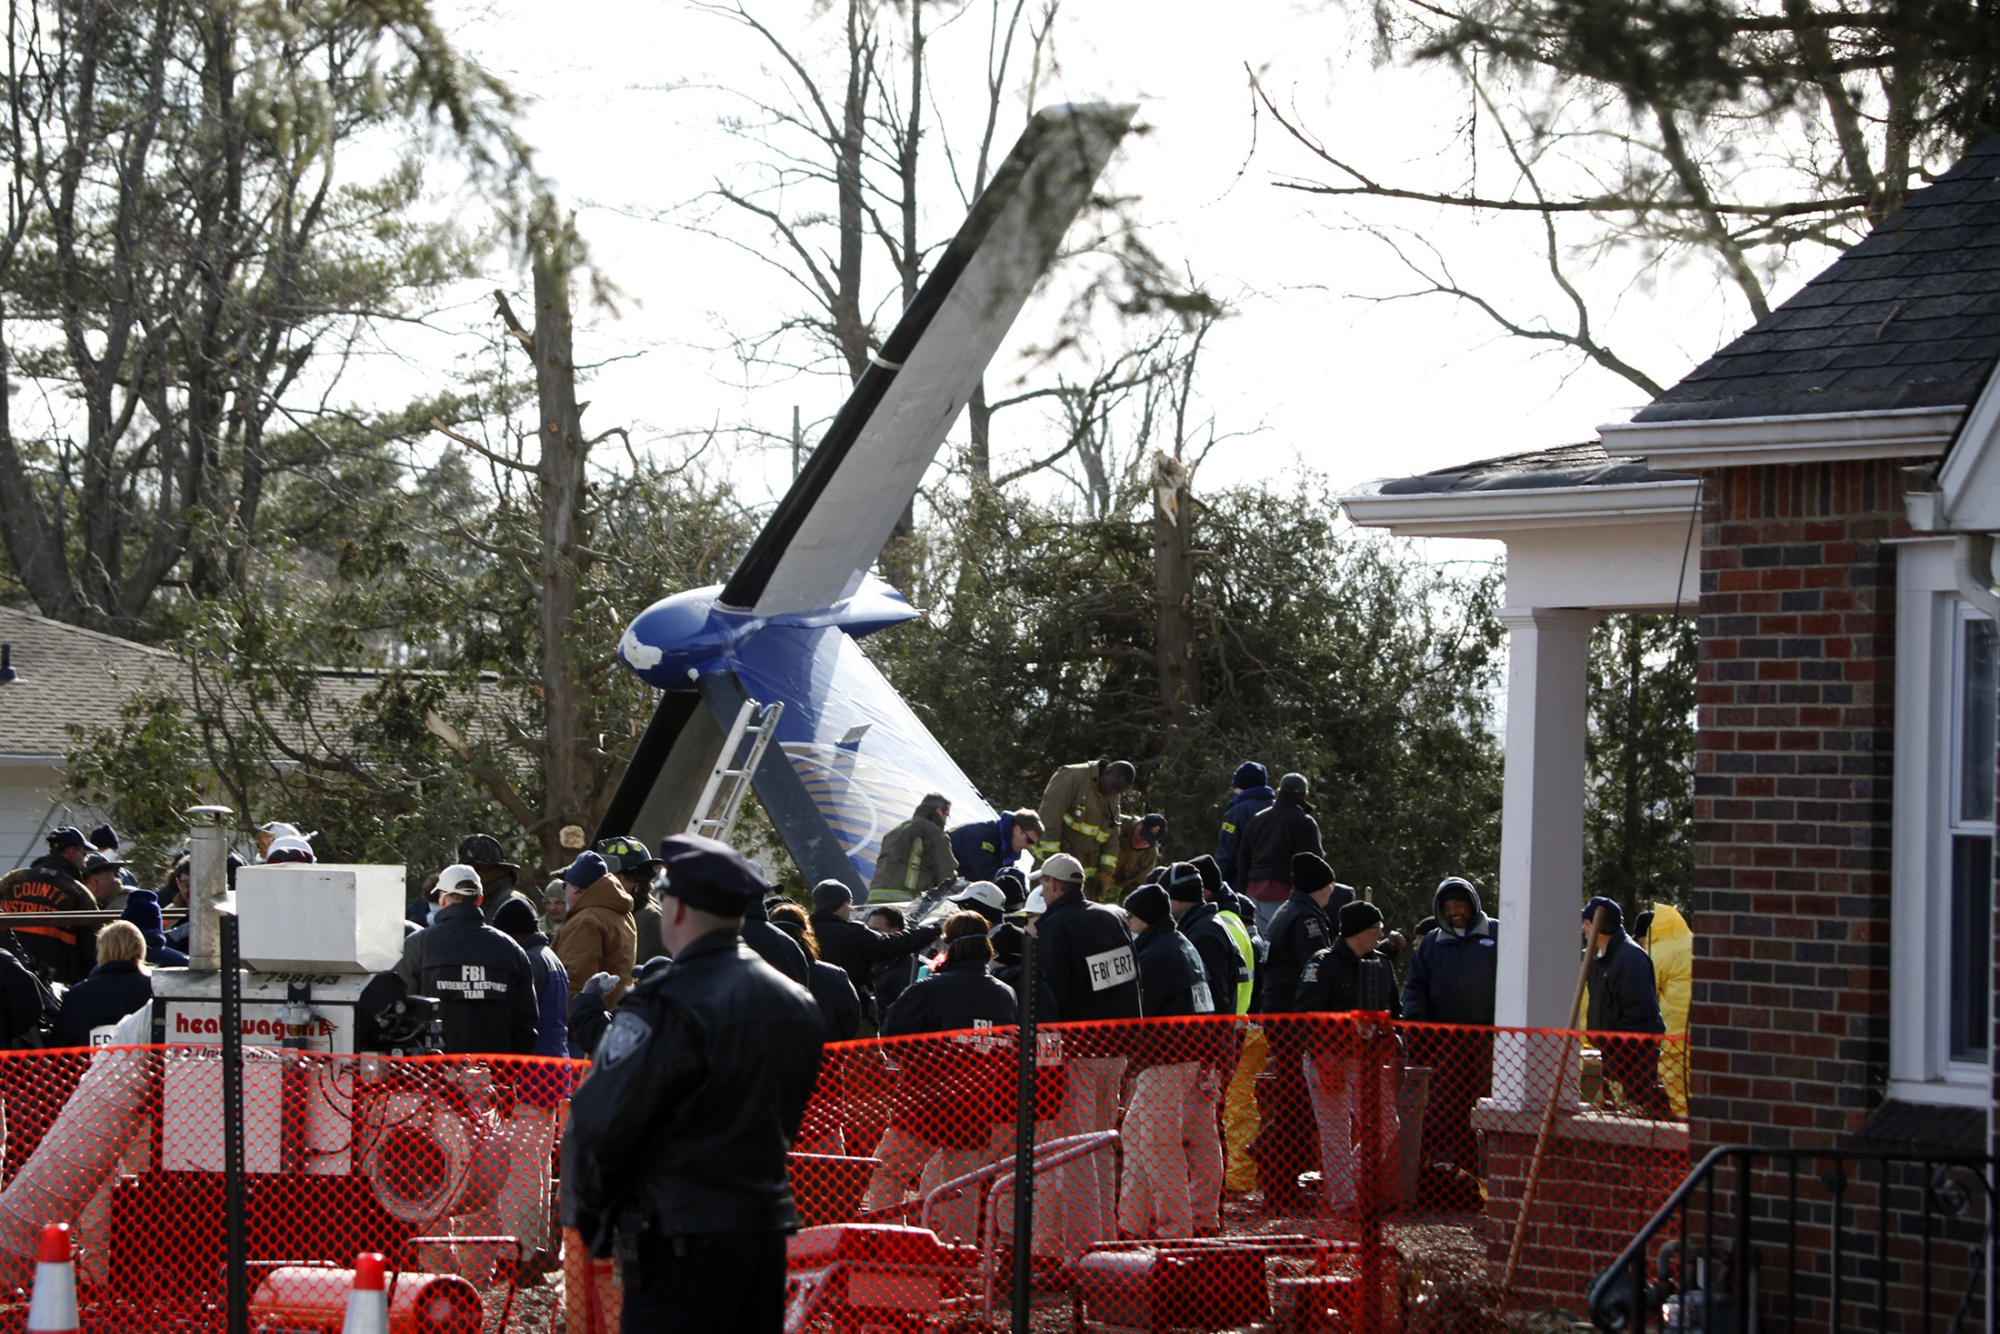 Workers and investigators clear debris from the scene of the crash on Feb. 16, 2009.